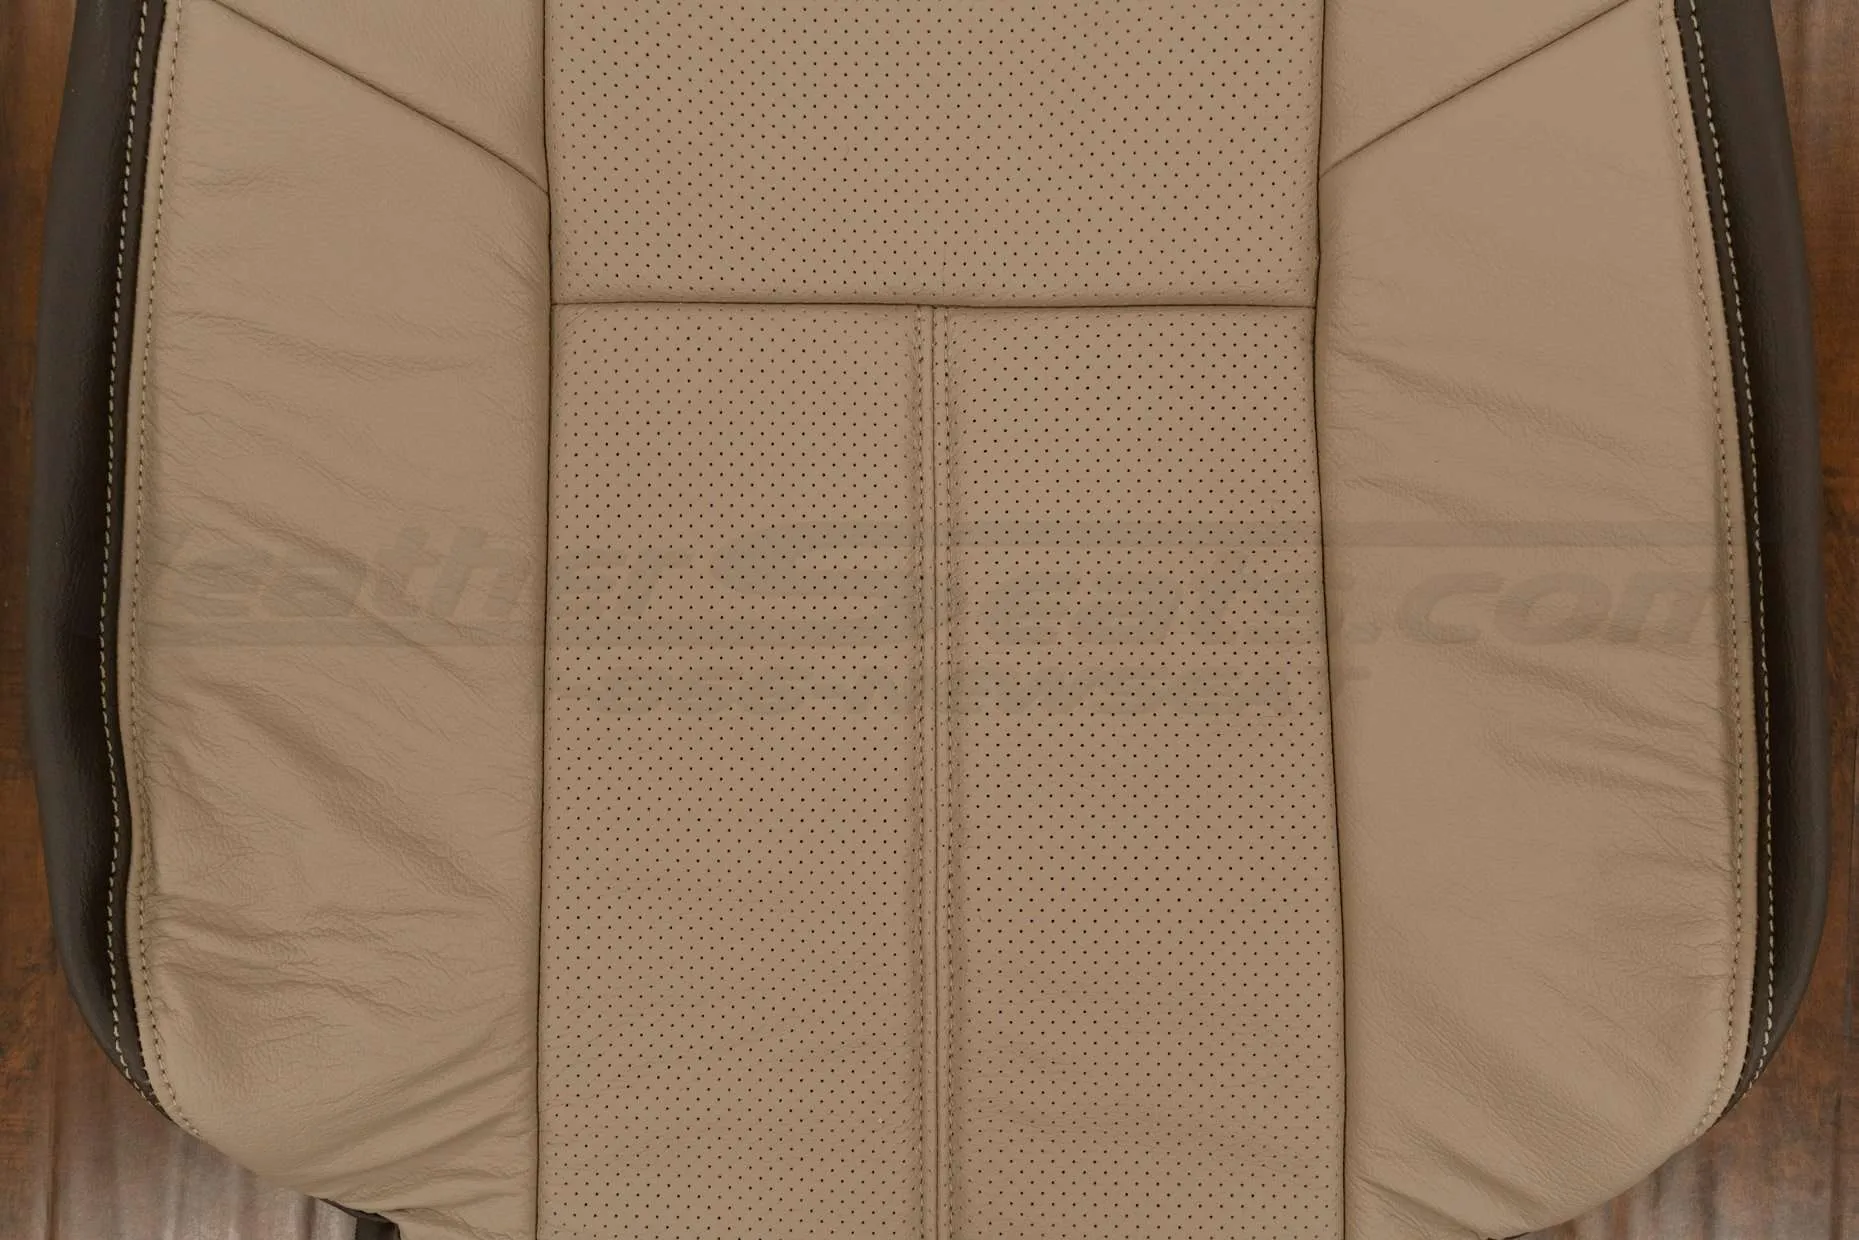 Perforated Body Section of Backrest Upholstery